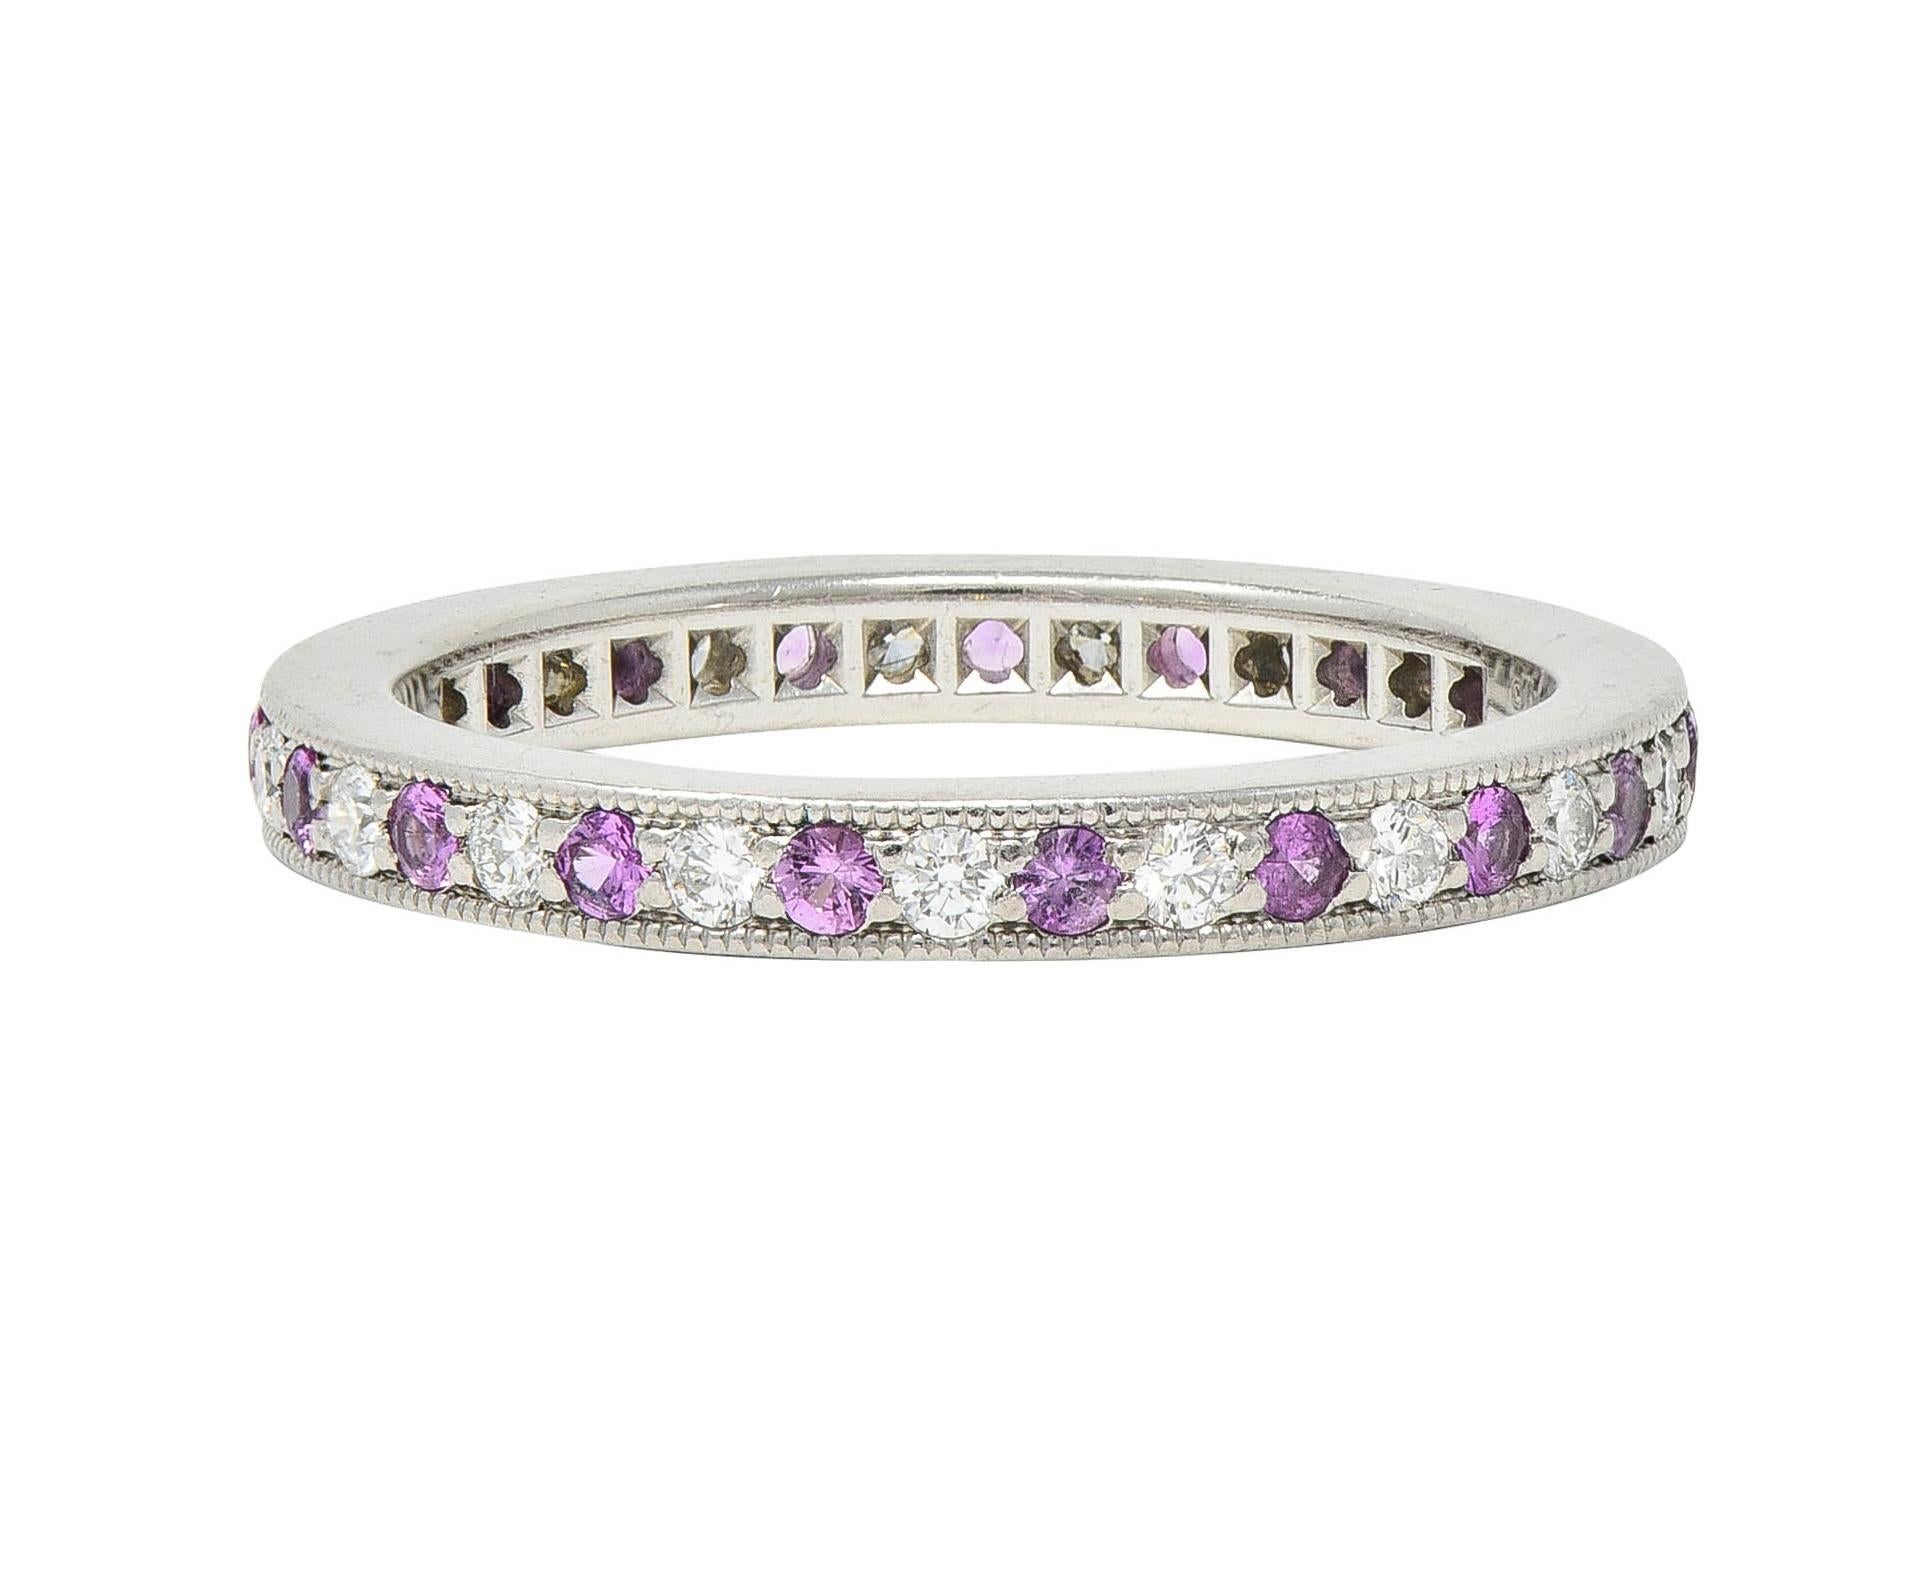 Tiffany & Co. 2000's Diamond Pink Sapphire Platinum Legacy Eternity Band Ring In Excellent Condition For Sale In Philadelphia, PA